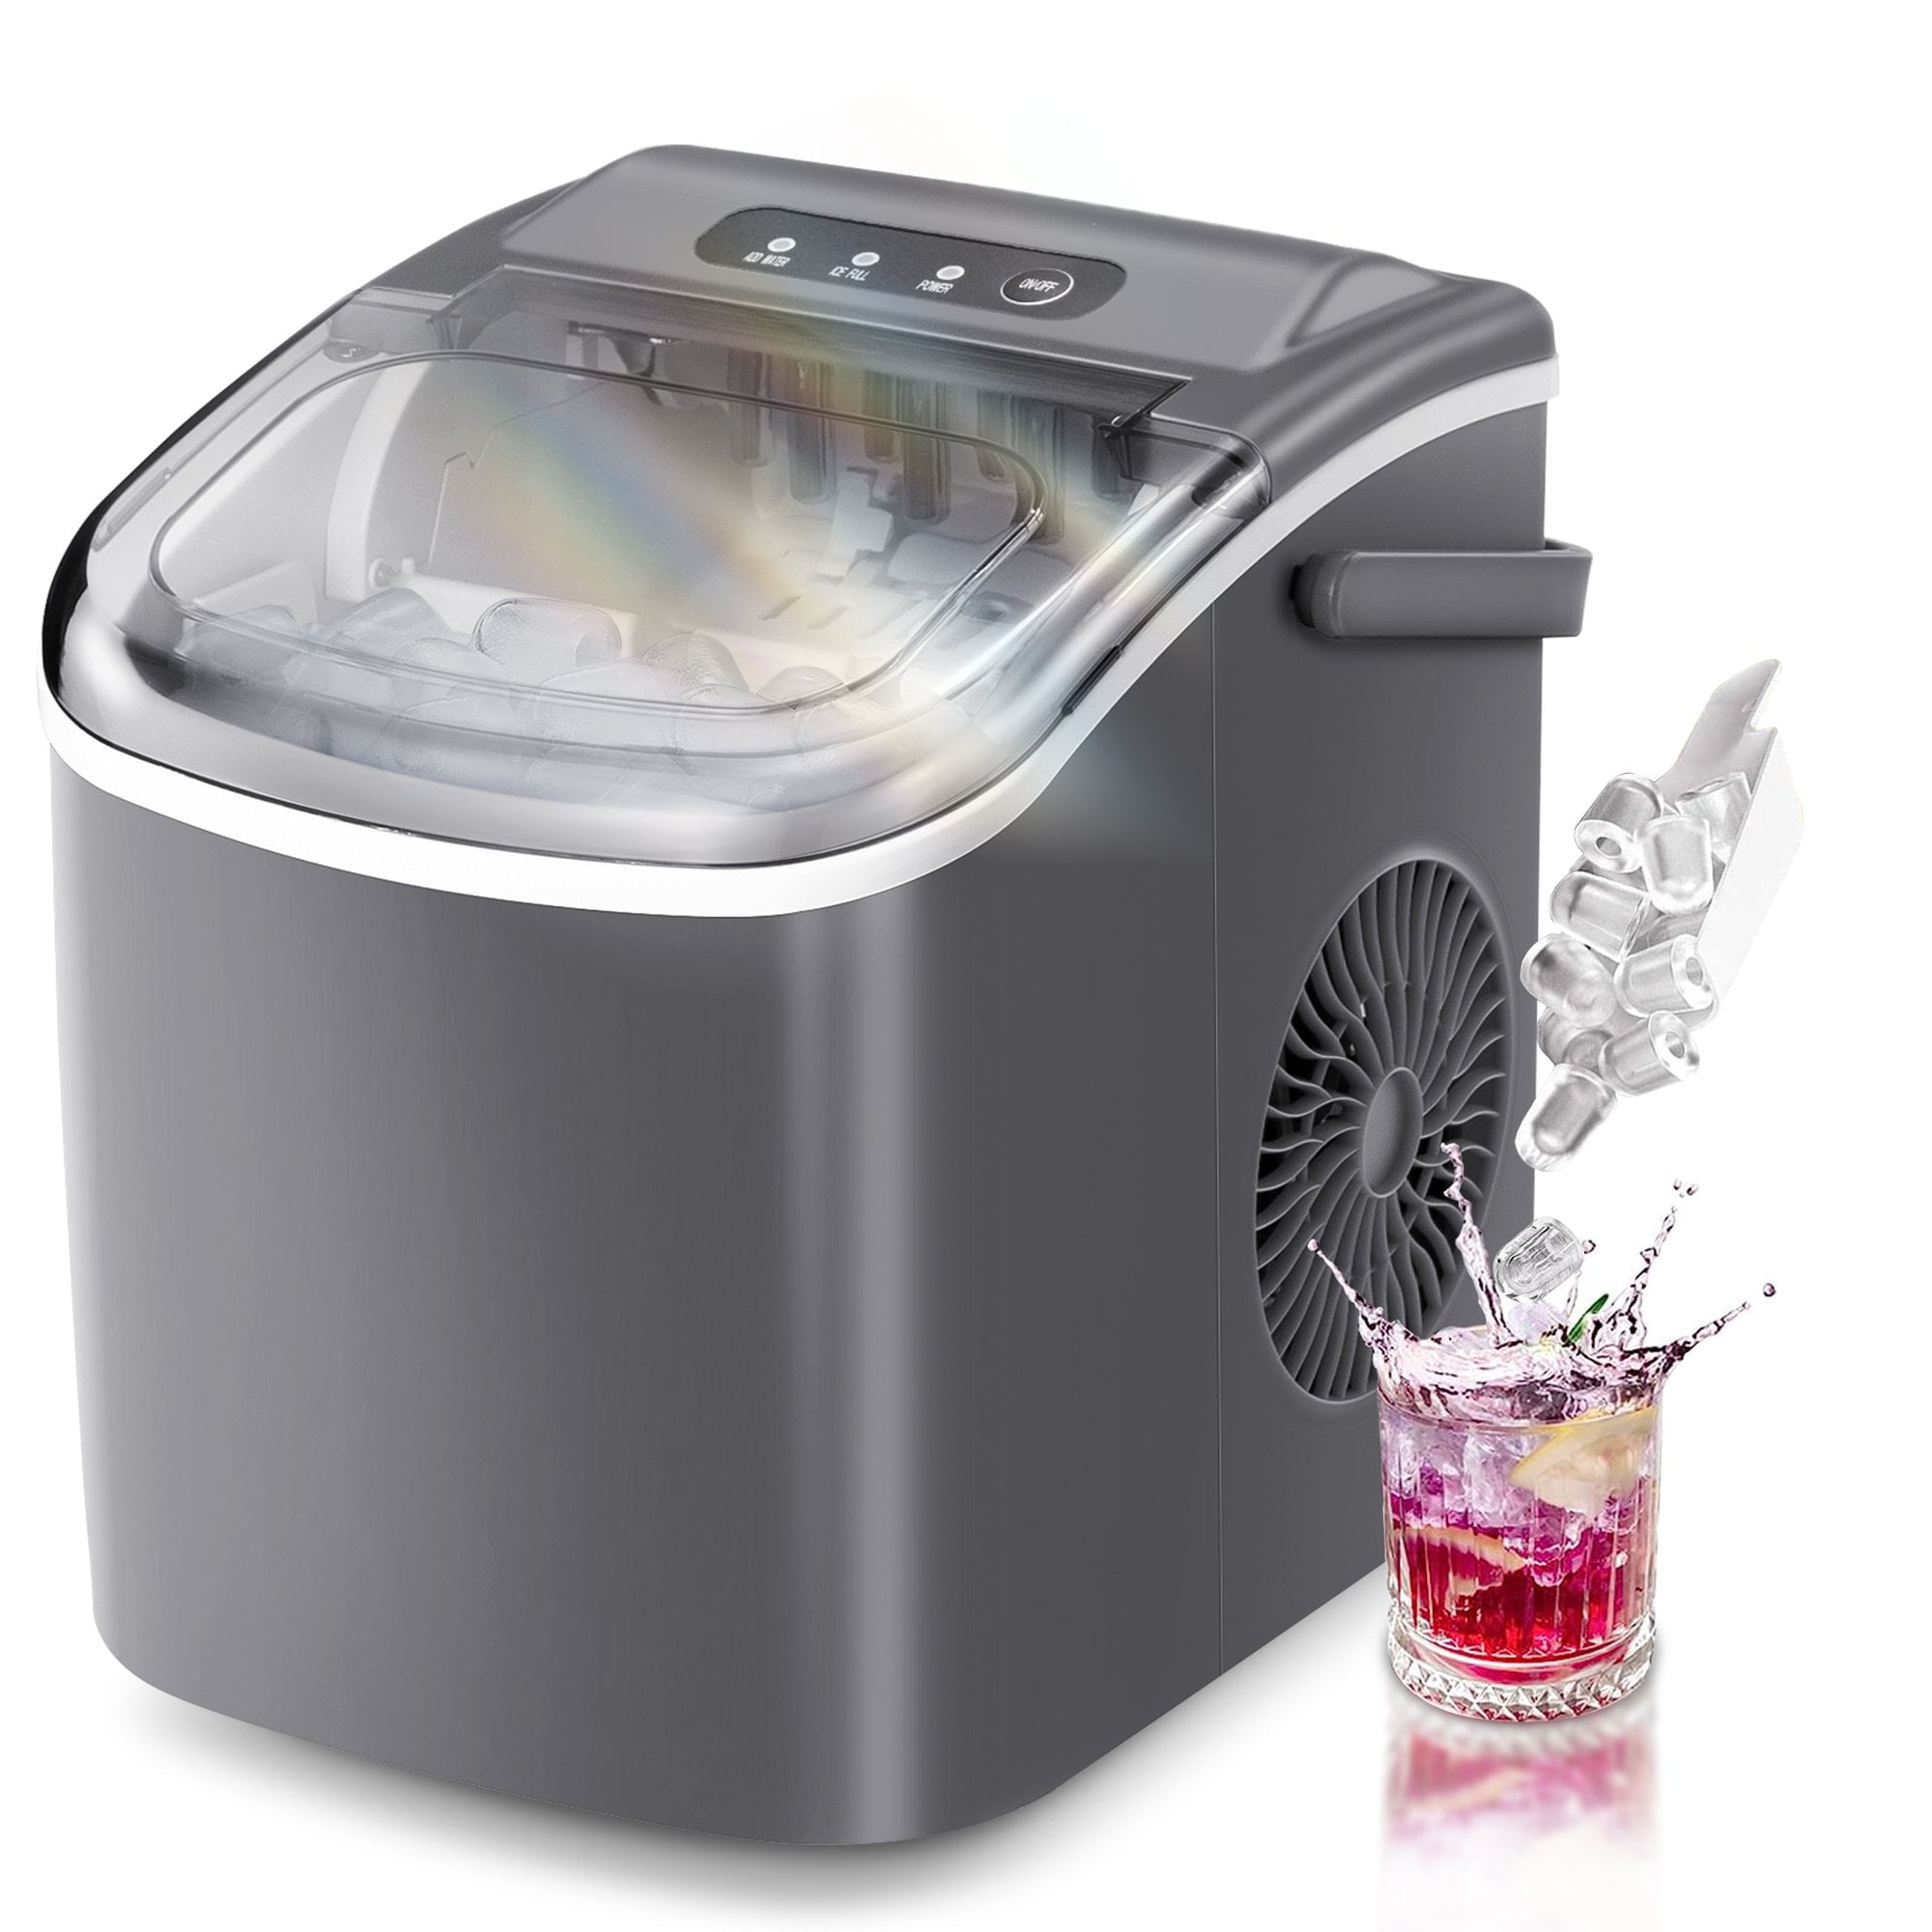 LHRIVER Countertop Ice Maker Portable Ice Machine with Handle, Self-Cl